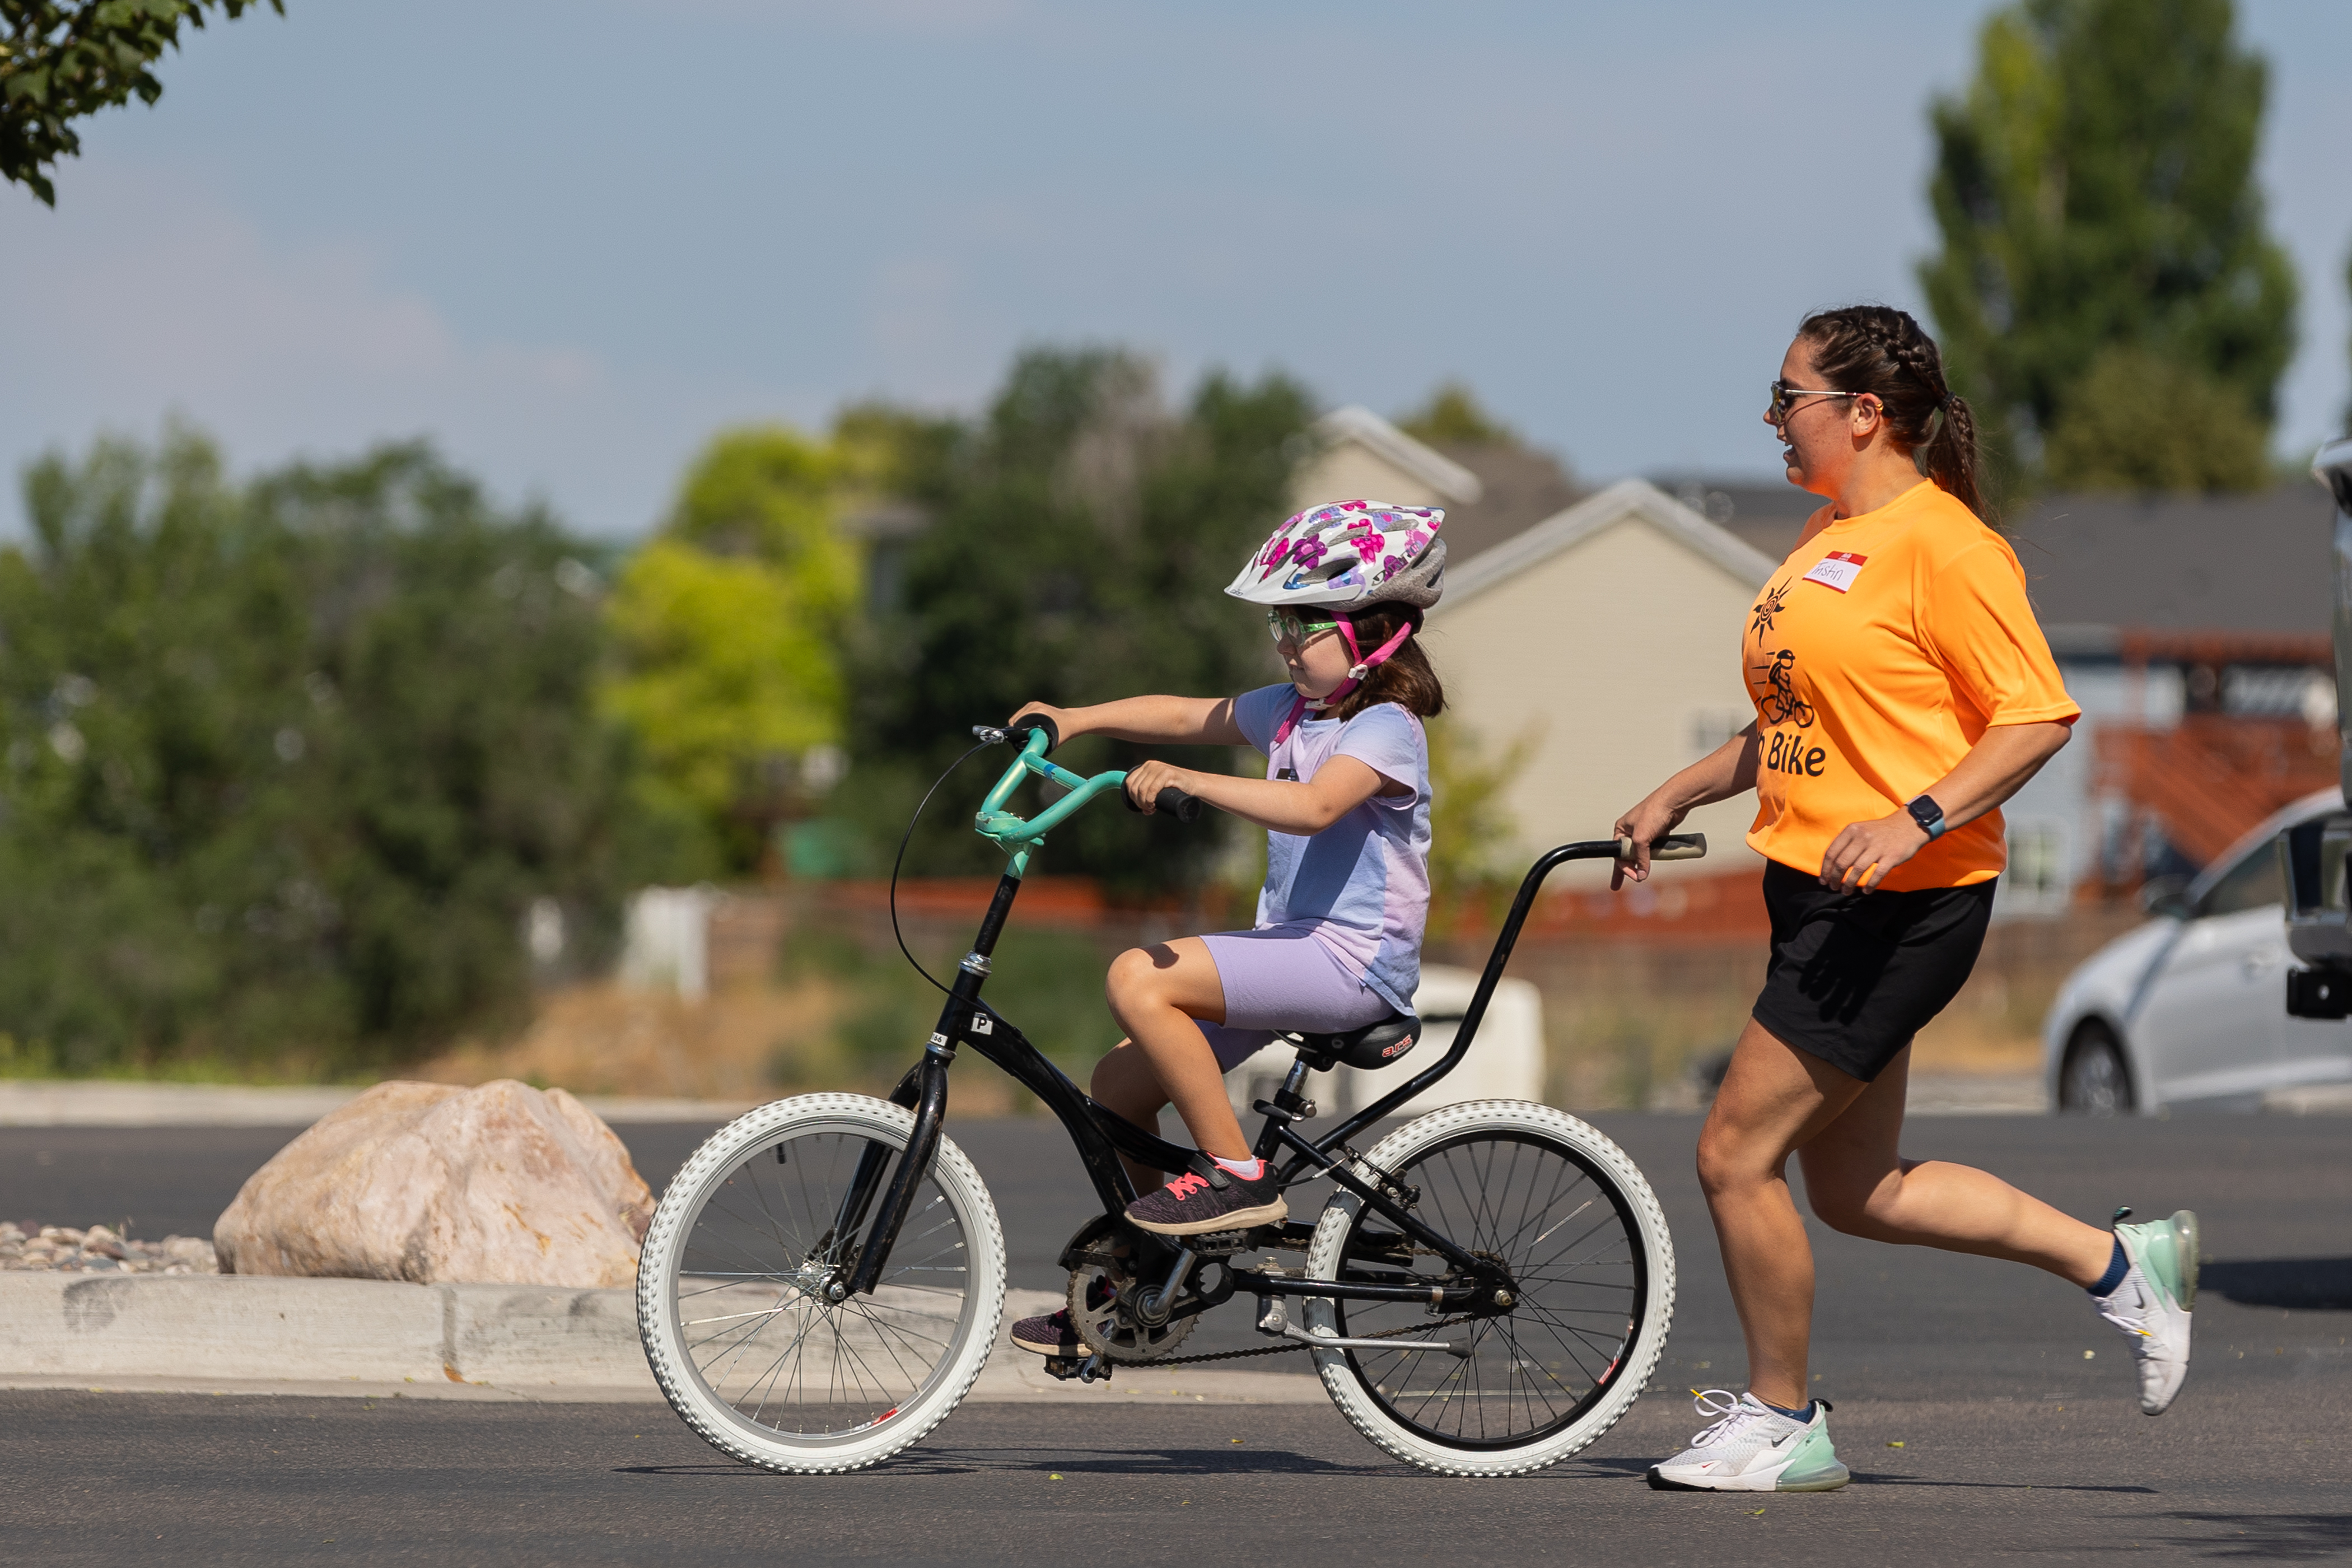 An OT student helps a child ride a bike by holding a stabilizing handle and jogging behind the bike.